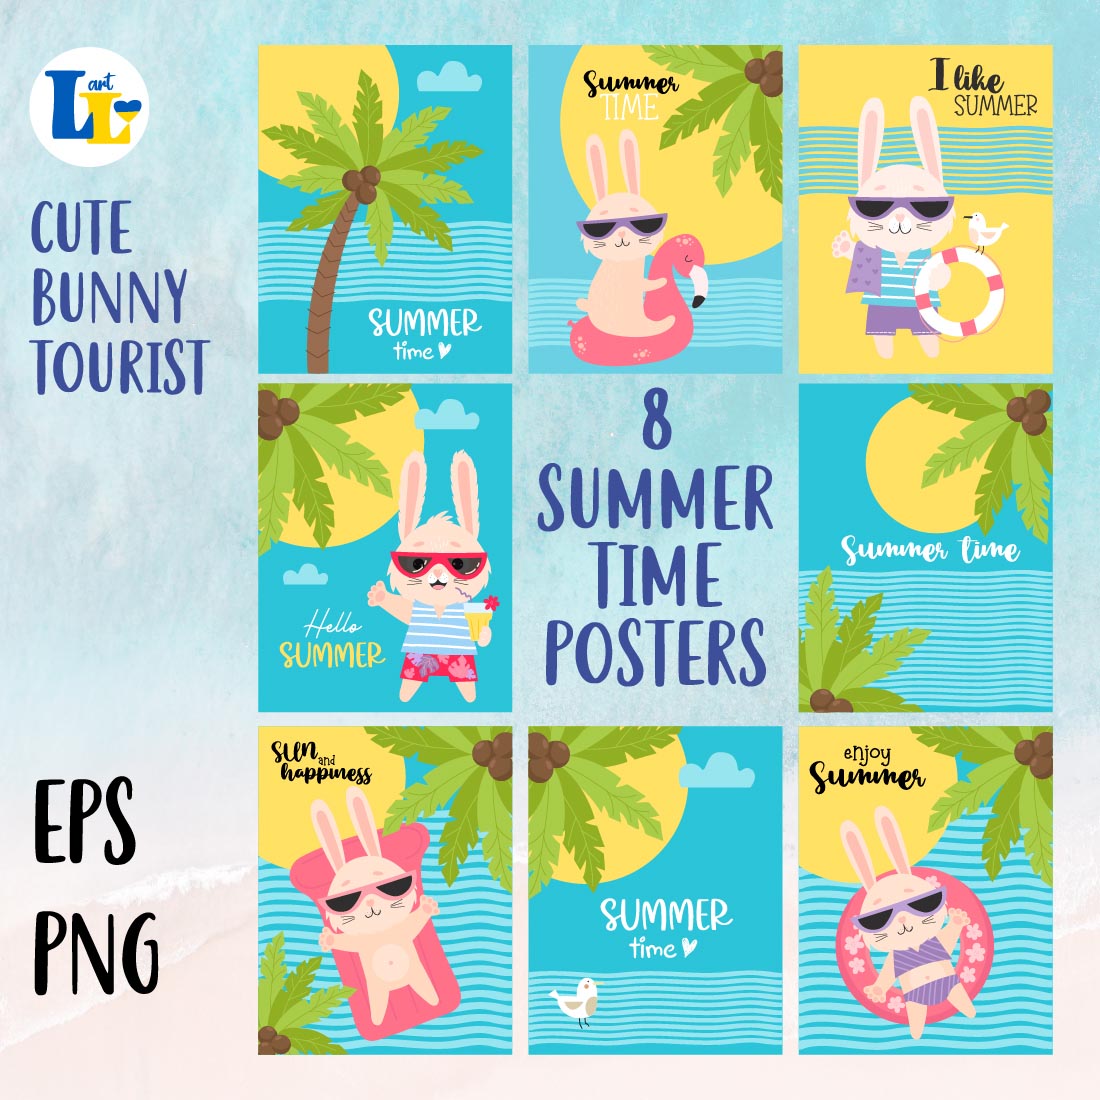 Cute Beach Bunny Tourist Summer Time Posters Cover Image.